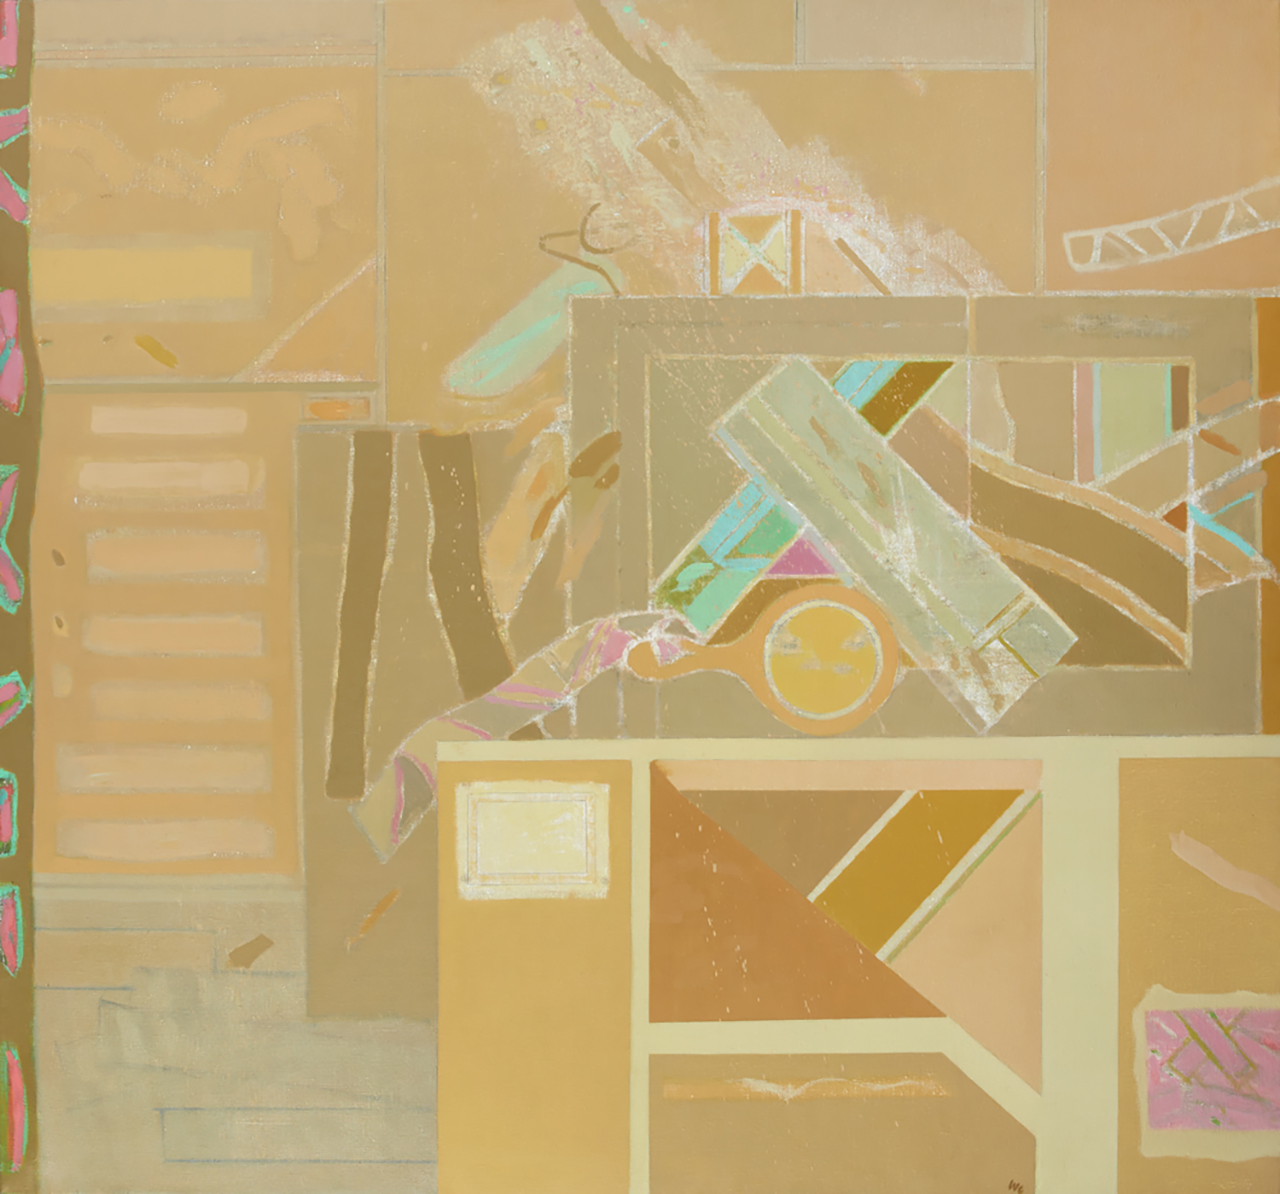 Abstract painting of the inside of a room – the furniture is all made of geometric shapes. The colours used are pastels in beiges, yellows, pinks and blues.